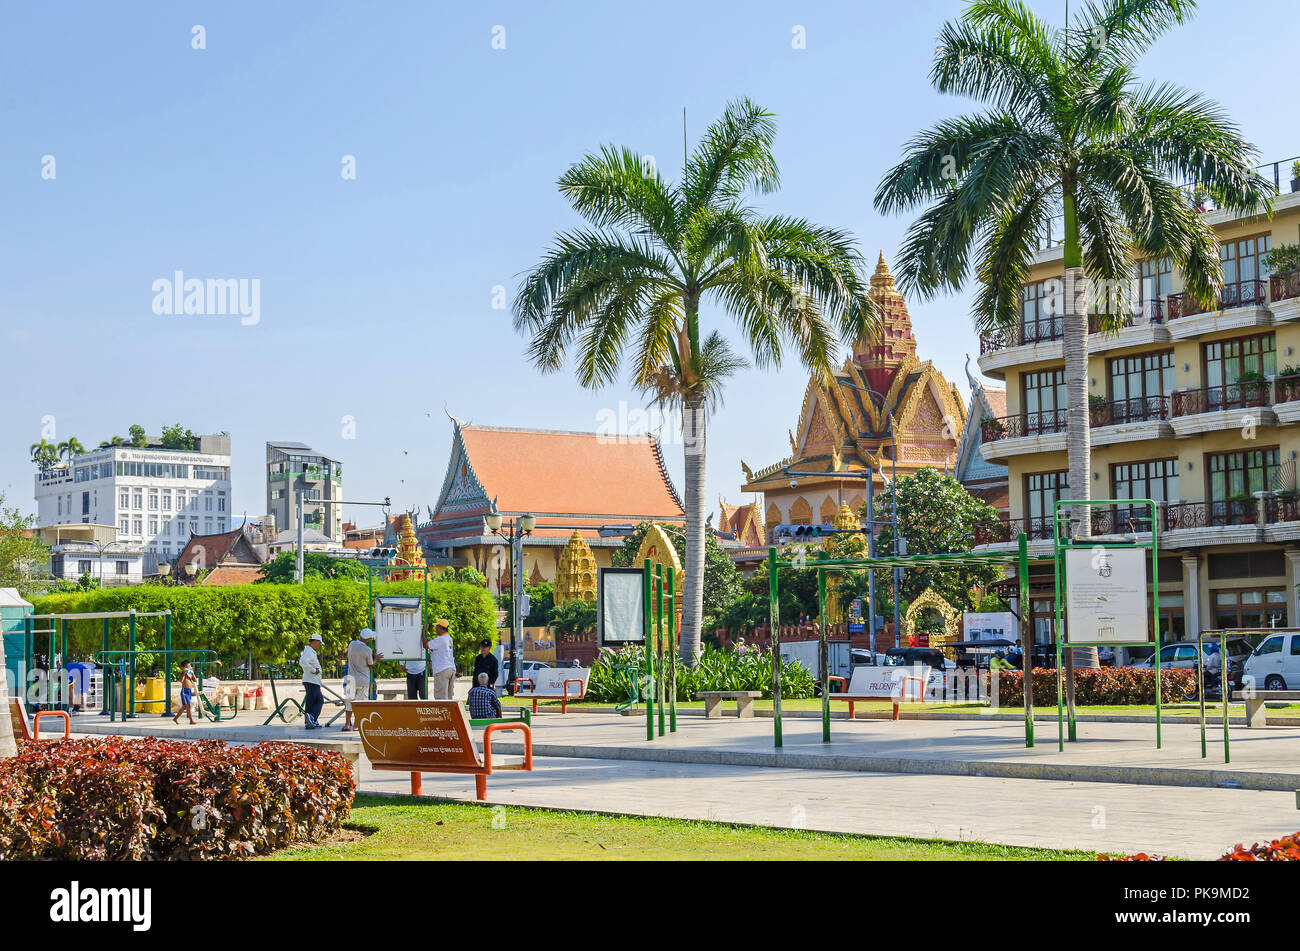 Phnom Penh, Cambodia - April 9, 2018: Preah Sisowath Quay - the boulevard running along the banks of the Mekong and Tonle Sap rivers and the most popu Stock Photo